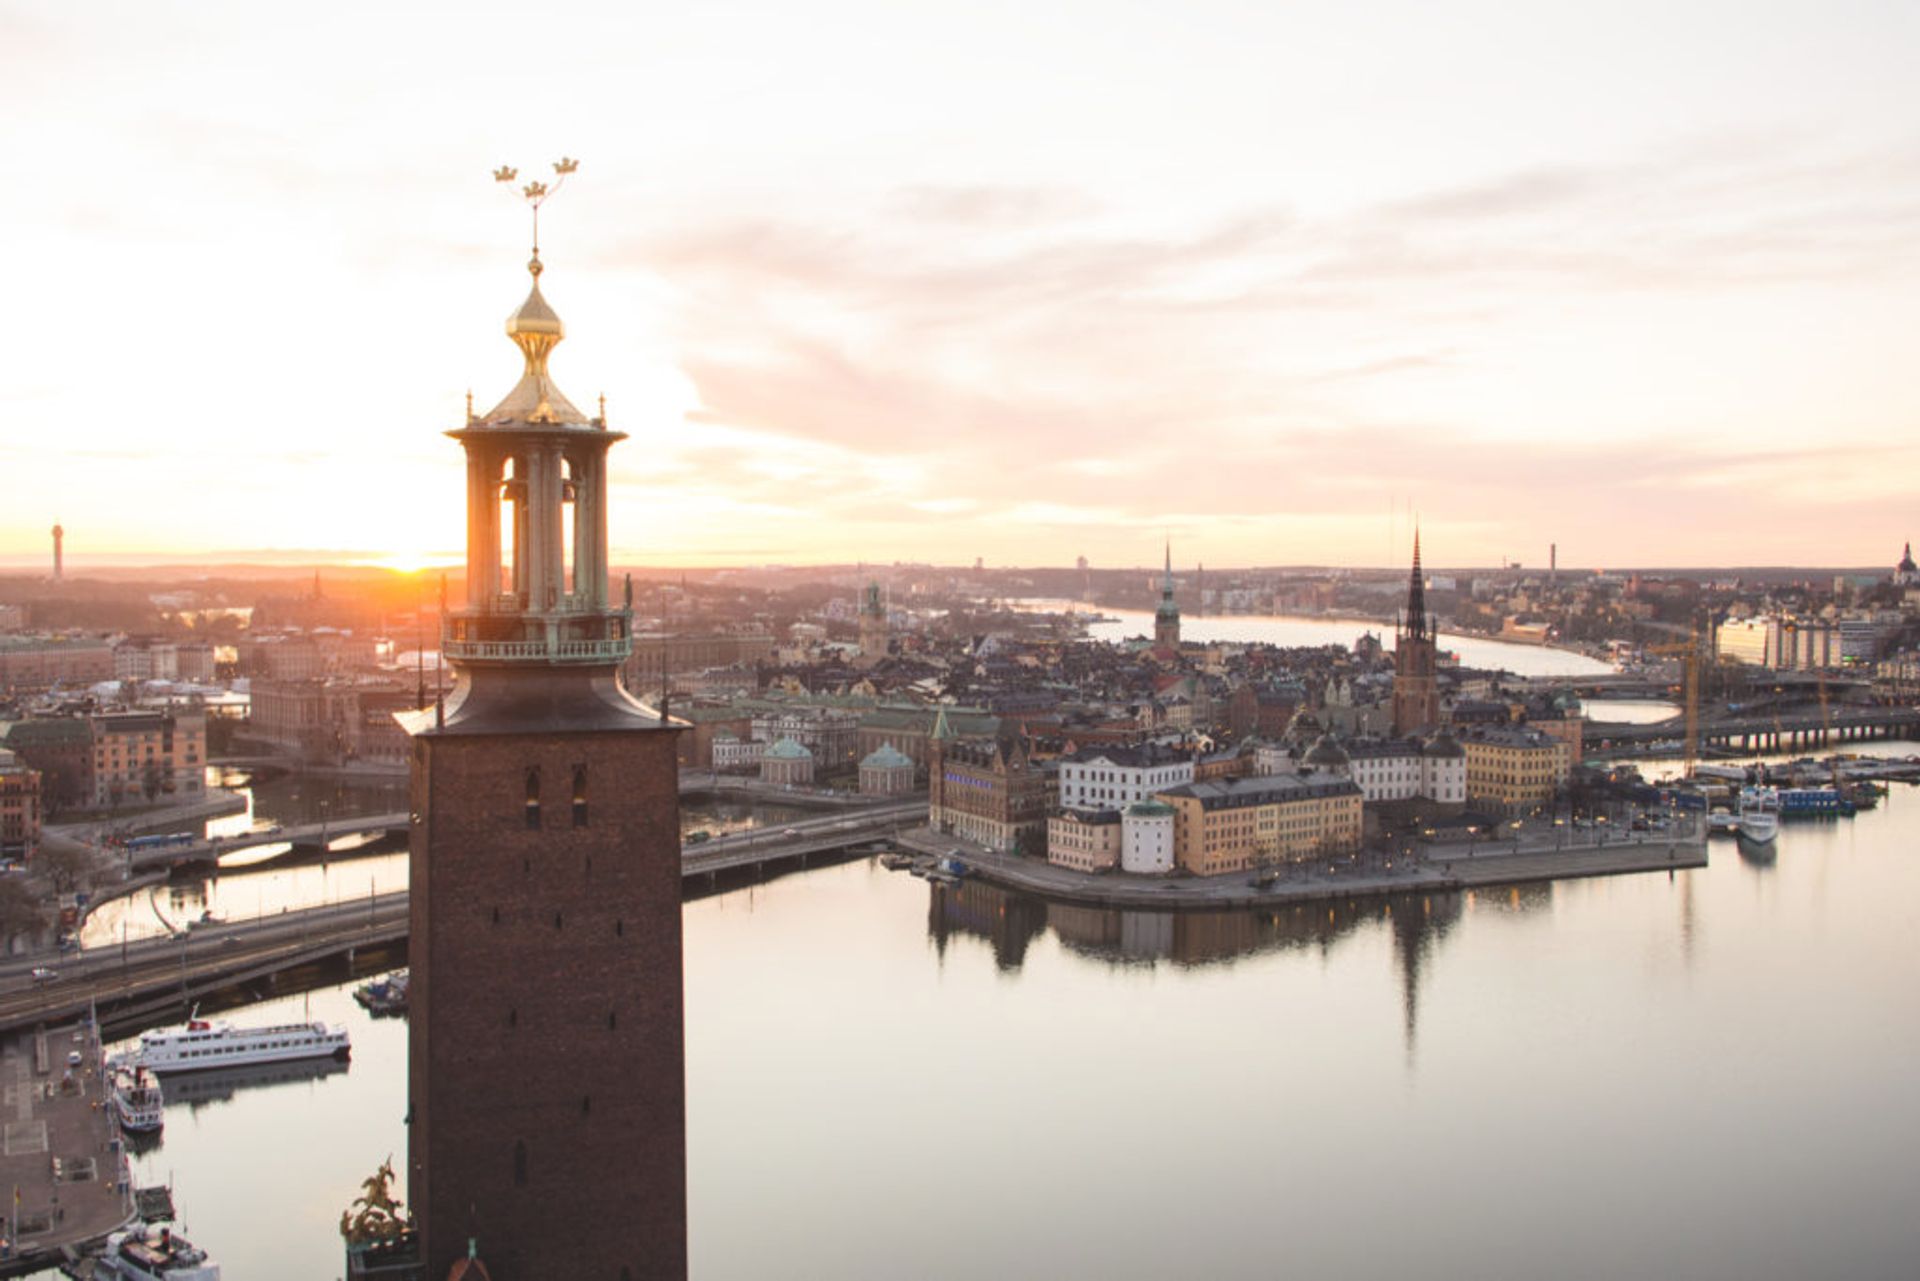 Stockholm's Old Town from above.